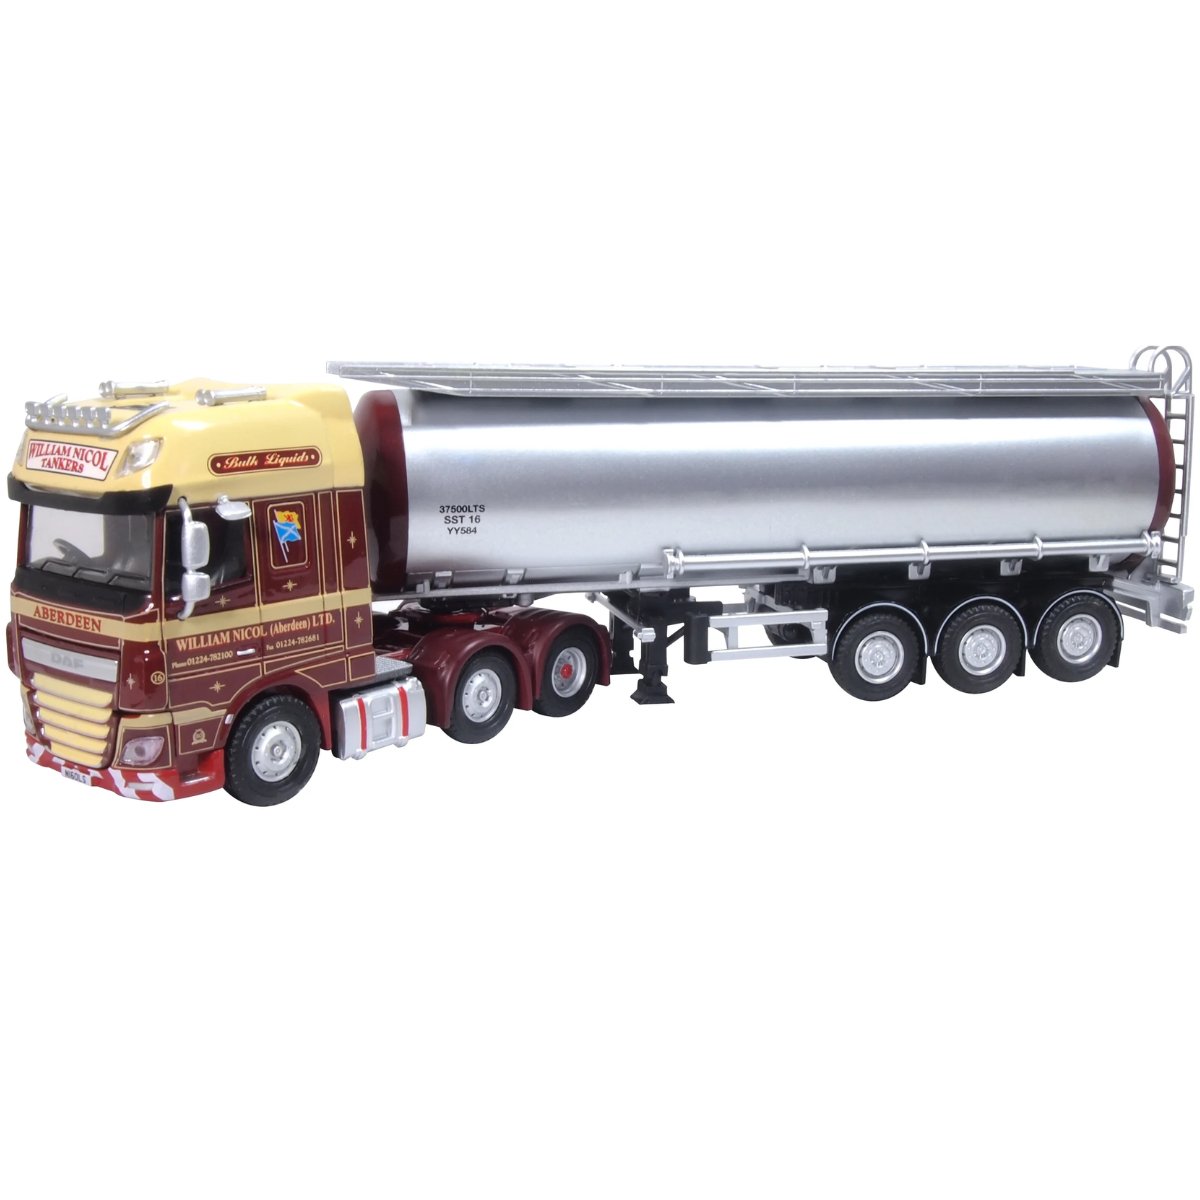 Oxford Diecast 76DXF006 DAF XF Euro 6 Cylindrical Tanker William Nicol - Phillips Hobbies